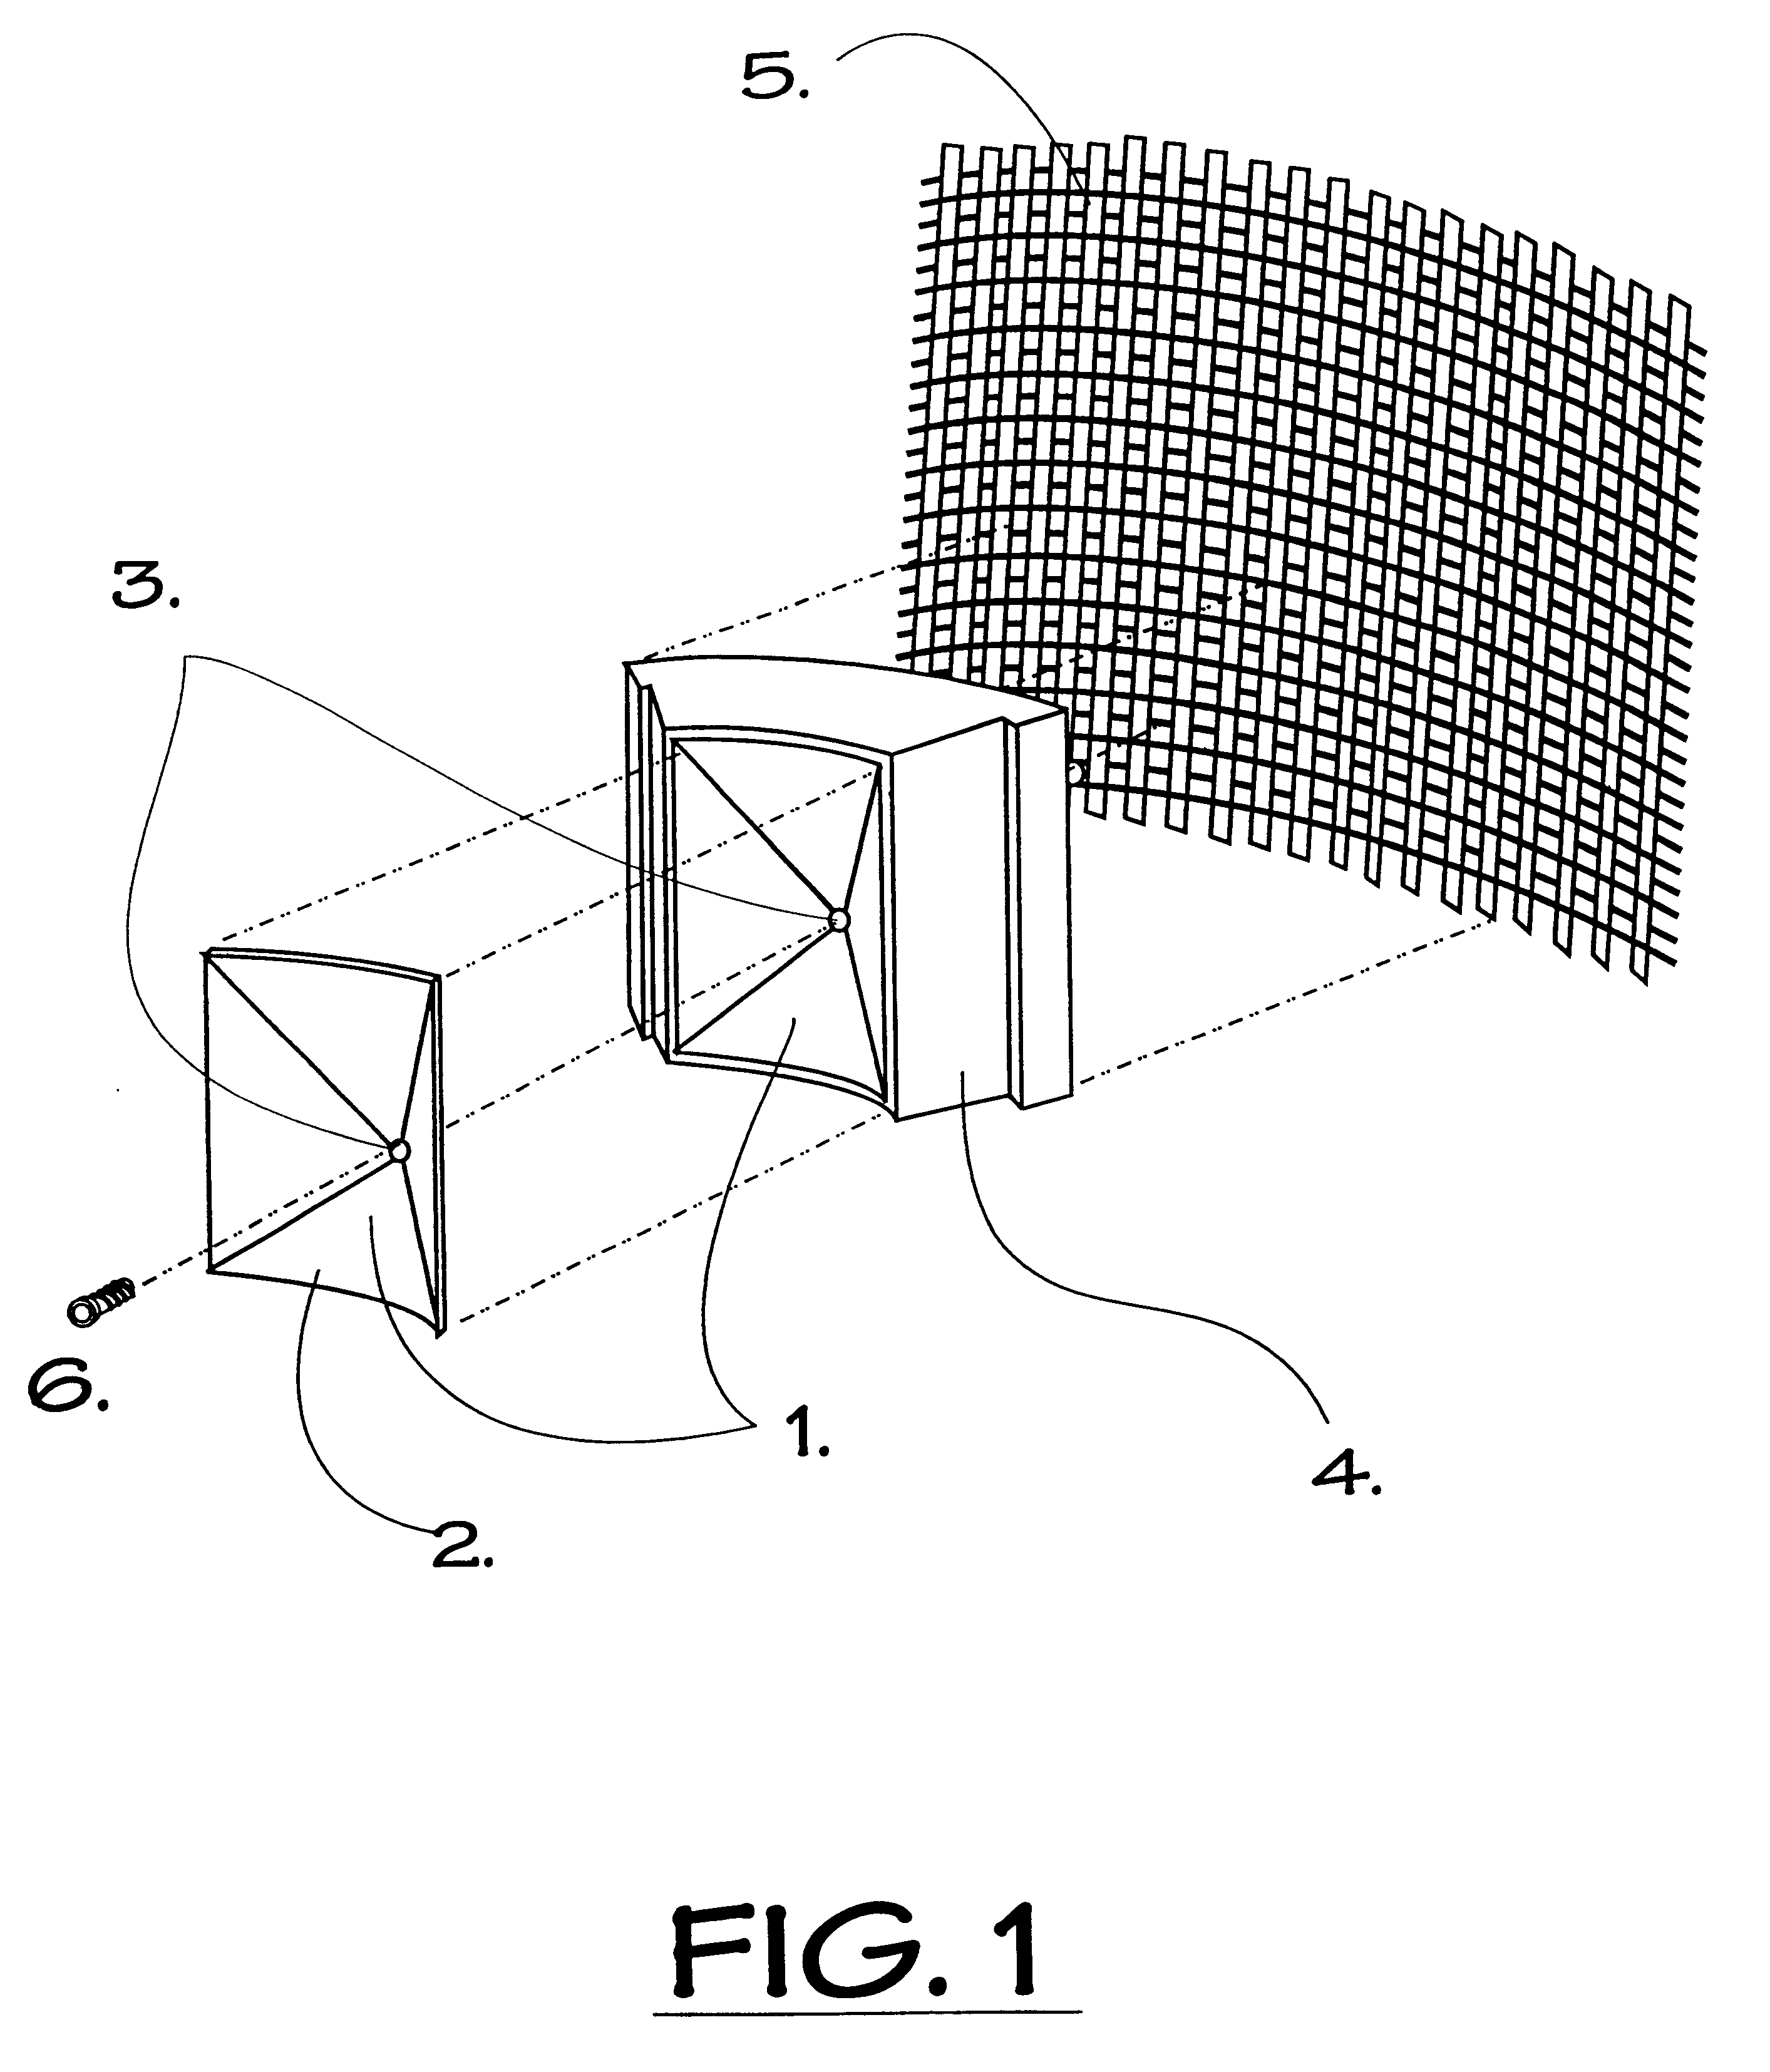 Method of construction for density screening outer transport walls